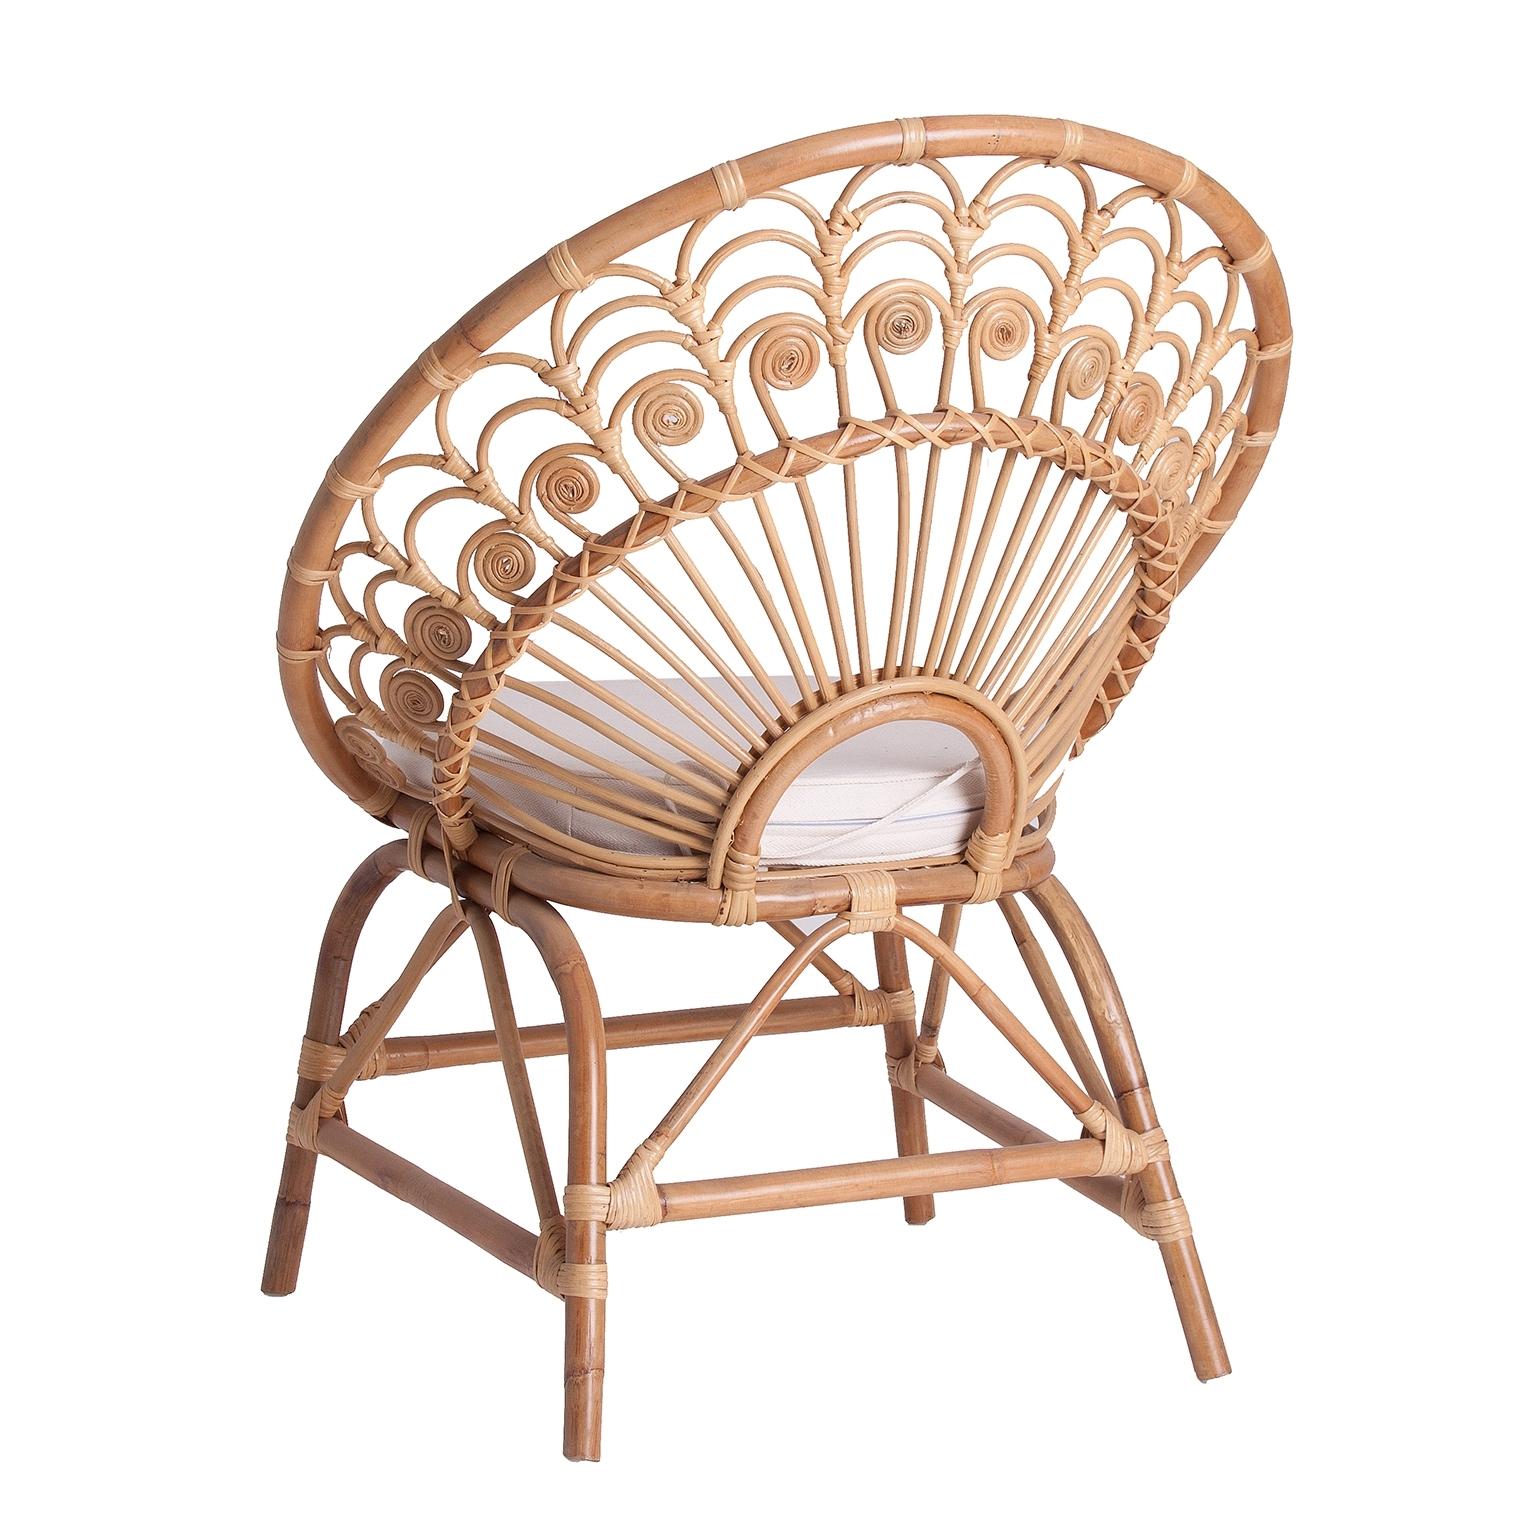 Sculptural and gorgeous rattan and wicker peacock design armchair. Vintage style with Bohemian chic look!